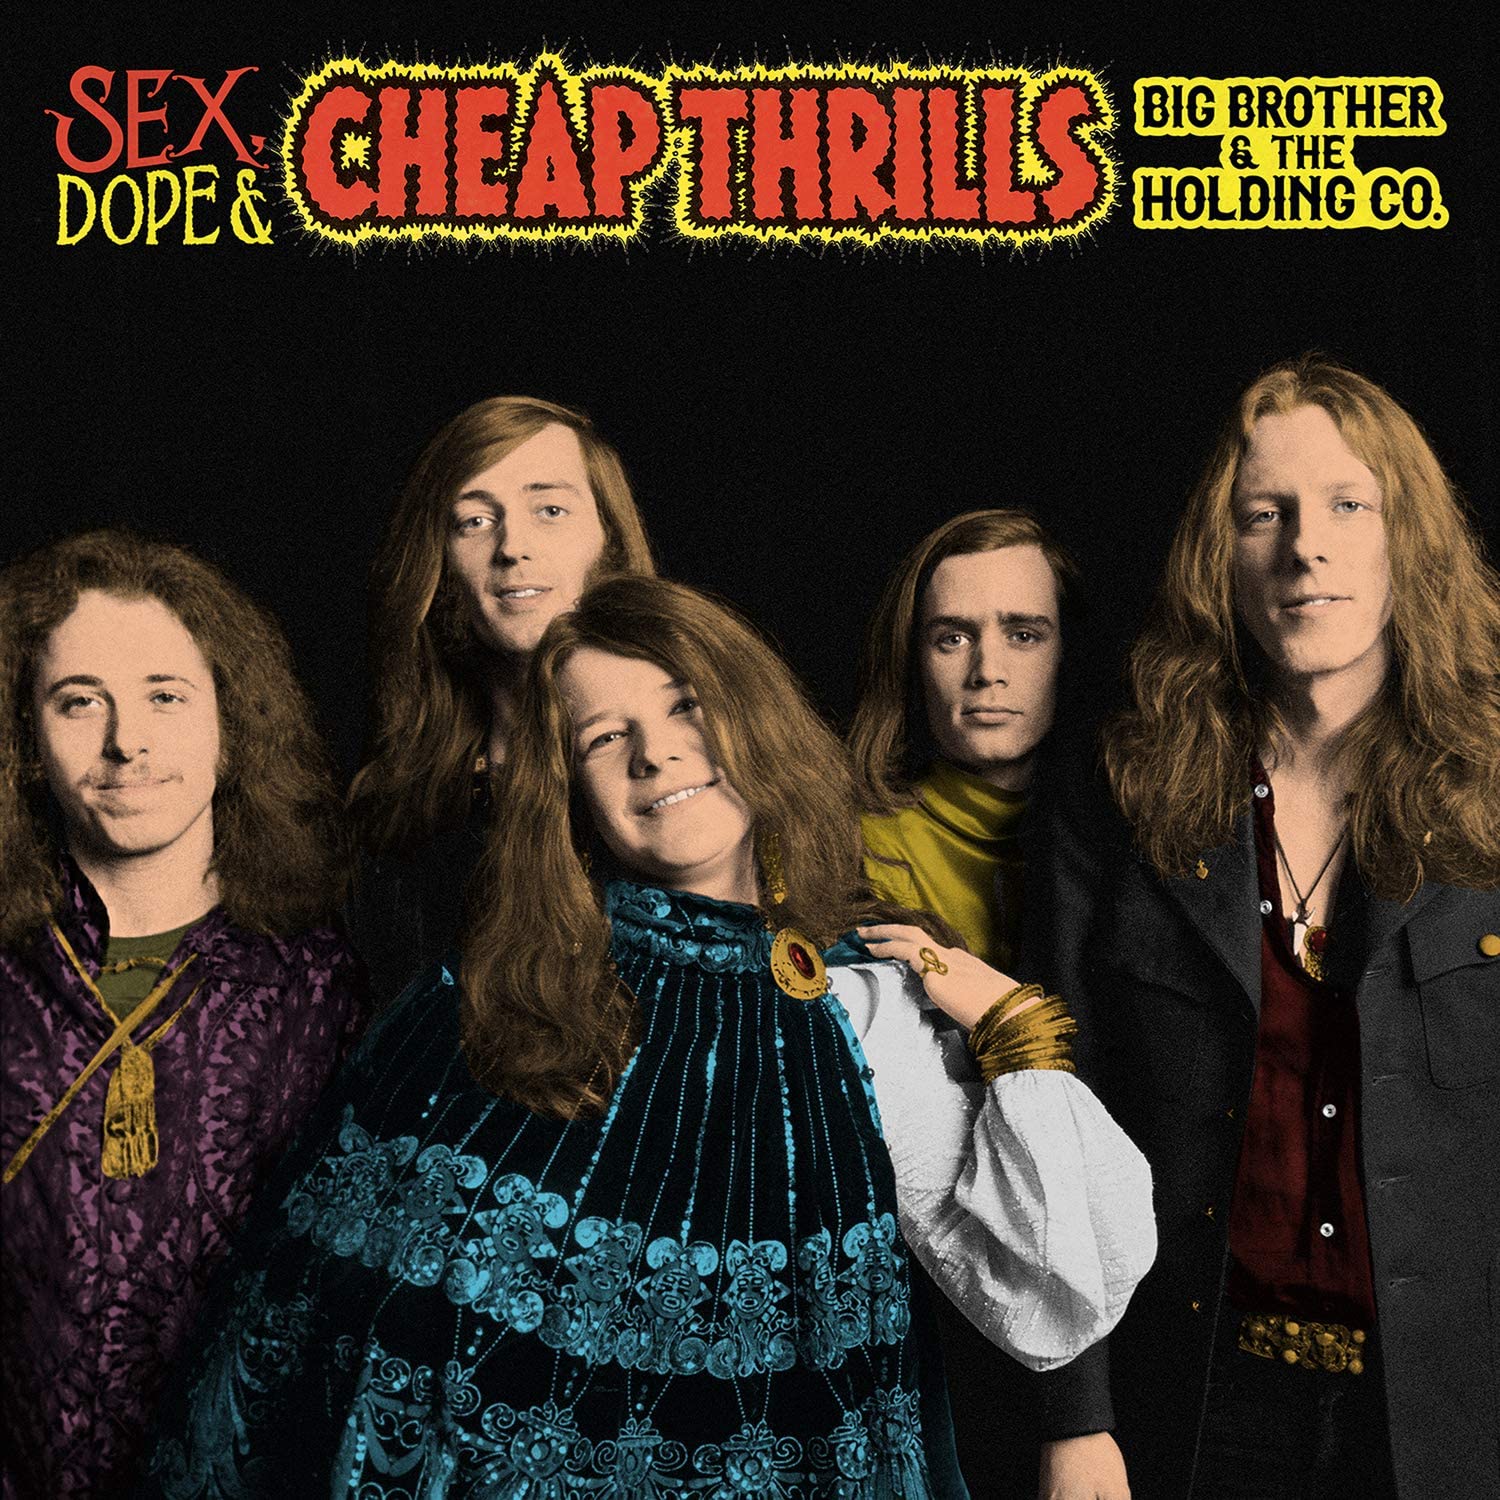 Sex, Dope & Cheap Thrills (Deluxe Edition) | Big Brother & The Holding Co.